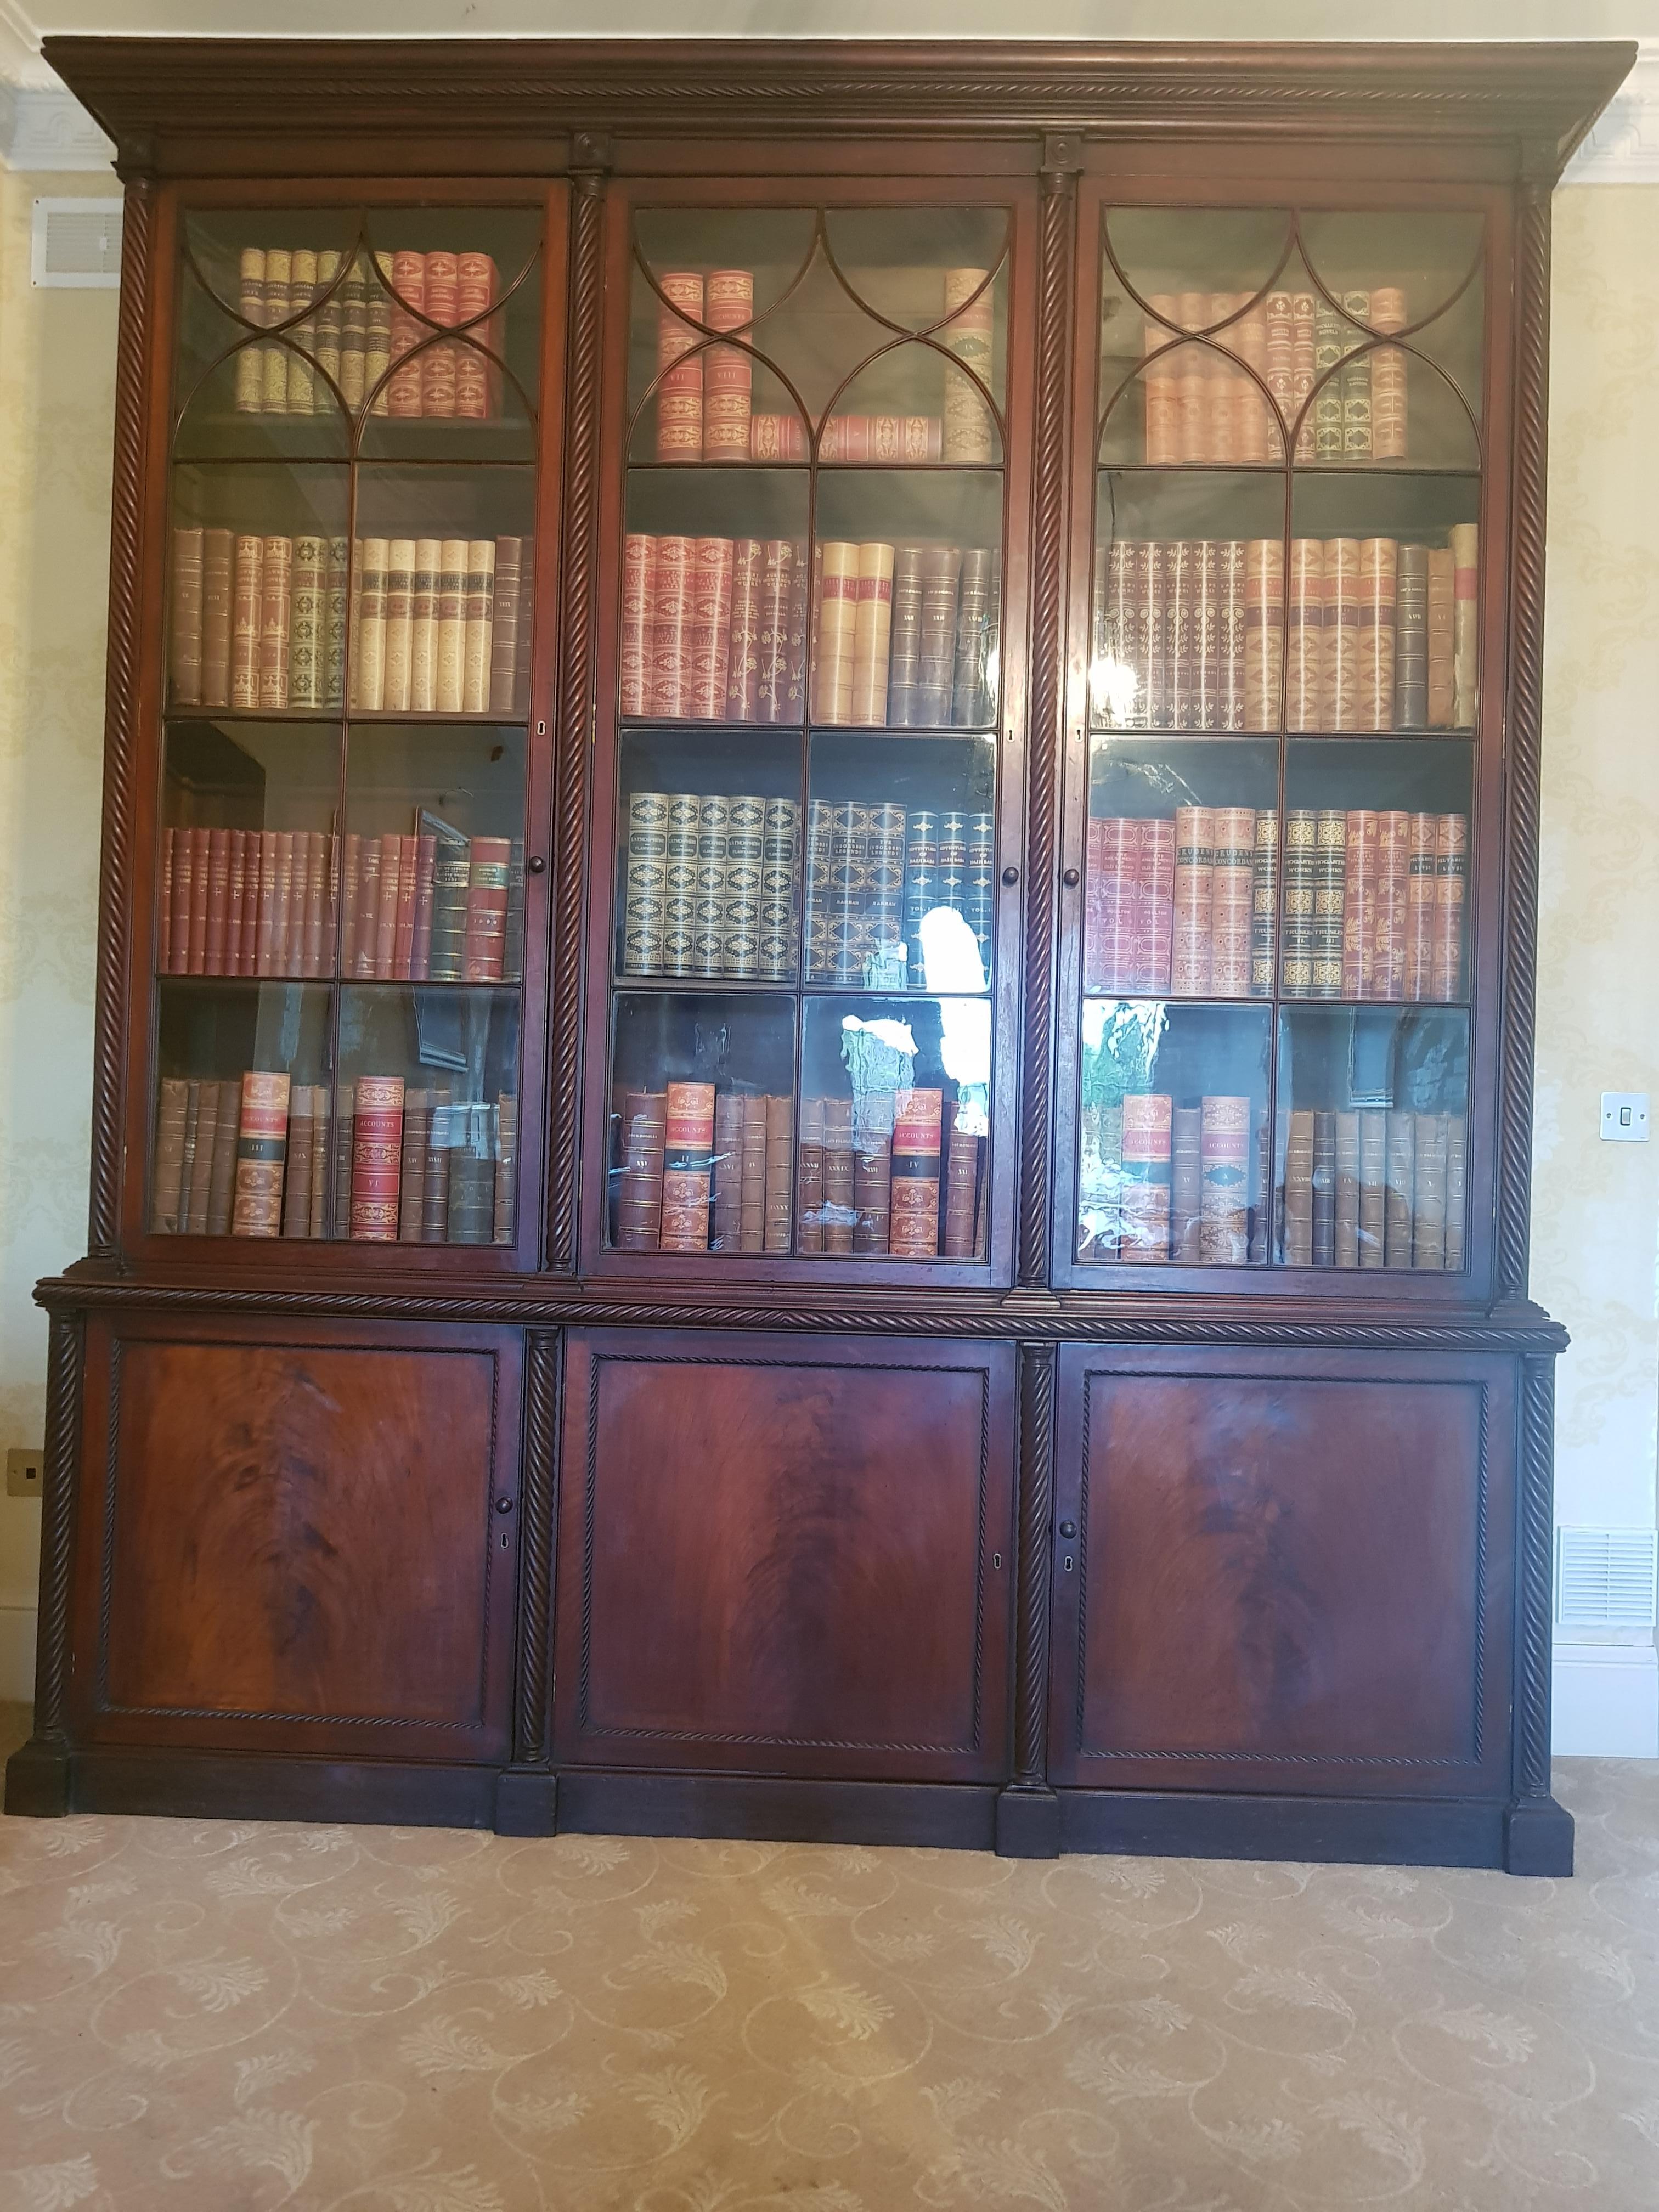 A very fine Irish Georgian mahogany bookcase, attributed to Mack, Williams & Gibton, with three opening glazed doors and shelving intersposed by Irish regency style rope twisted design pilasters terminating in circular mouldings to an upper cornice